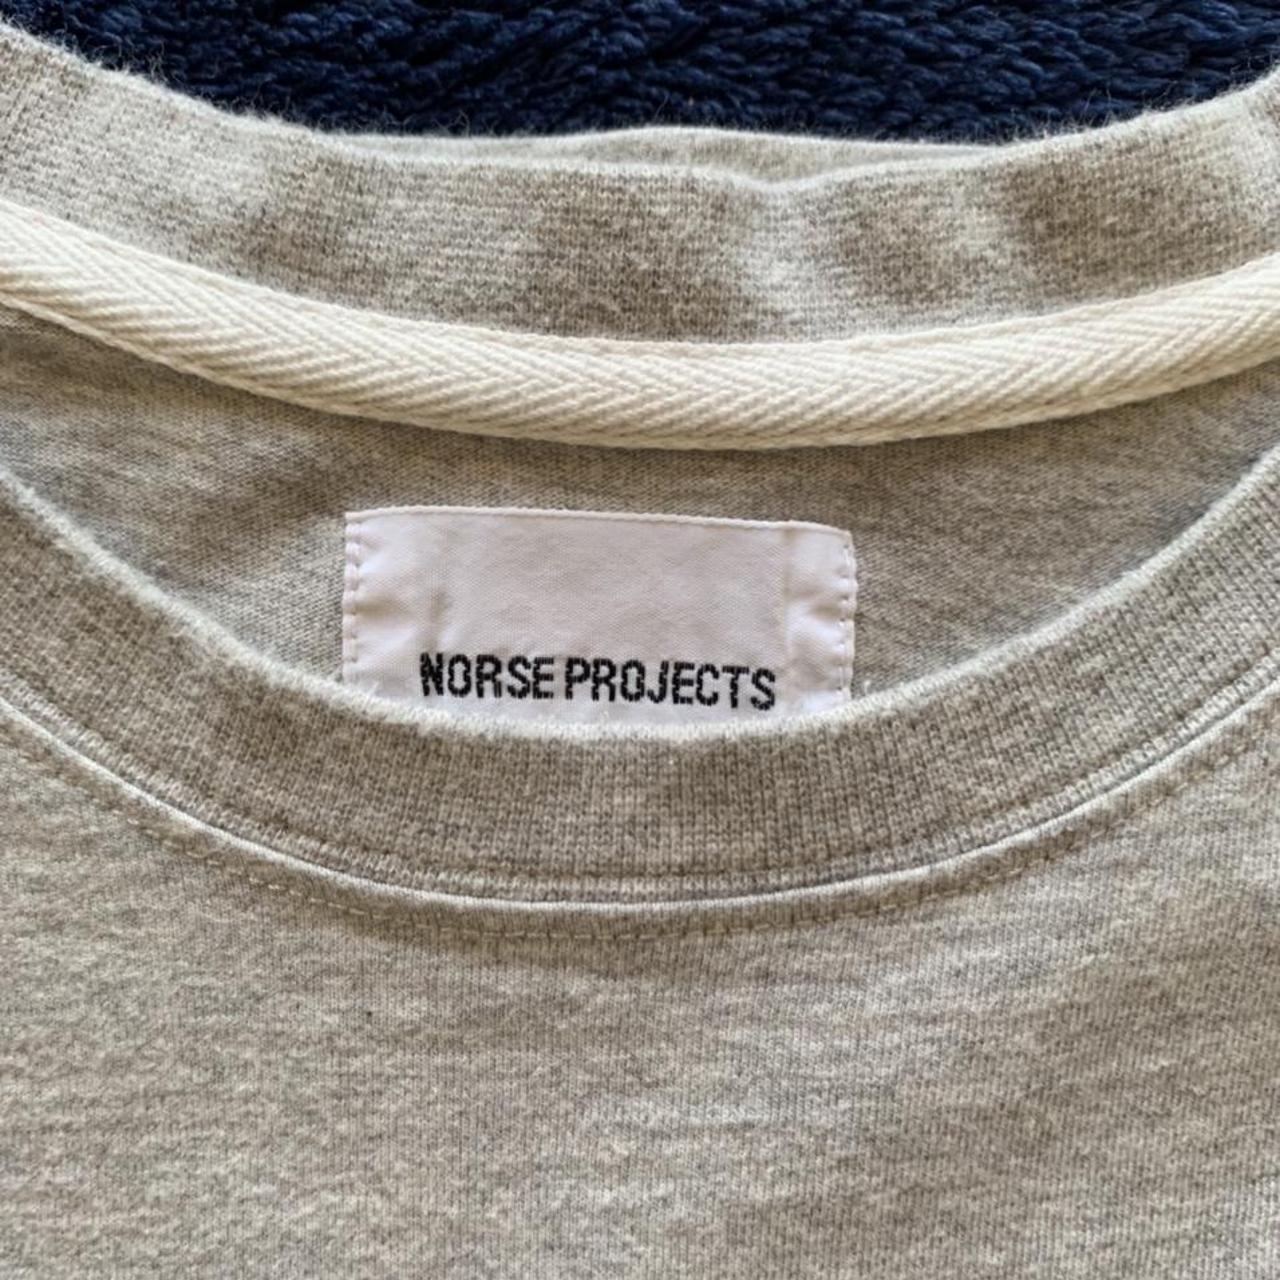 Product Image 4 - Norse Projects Niels Basic T

Size